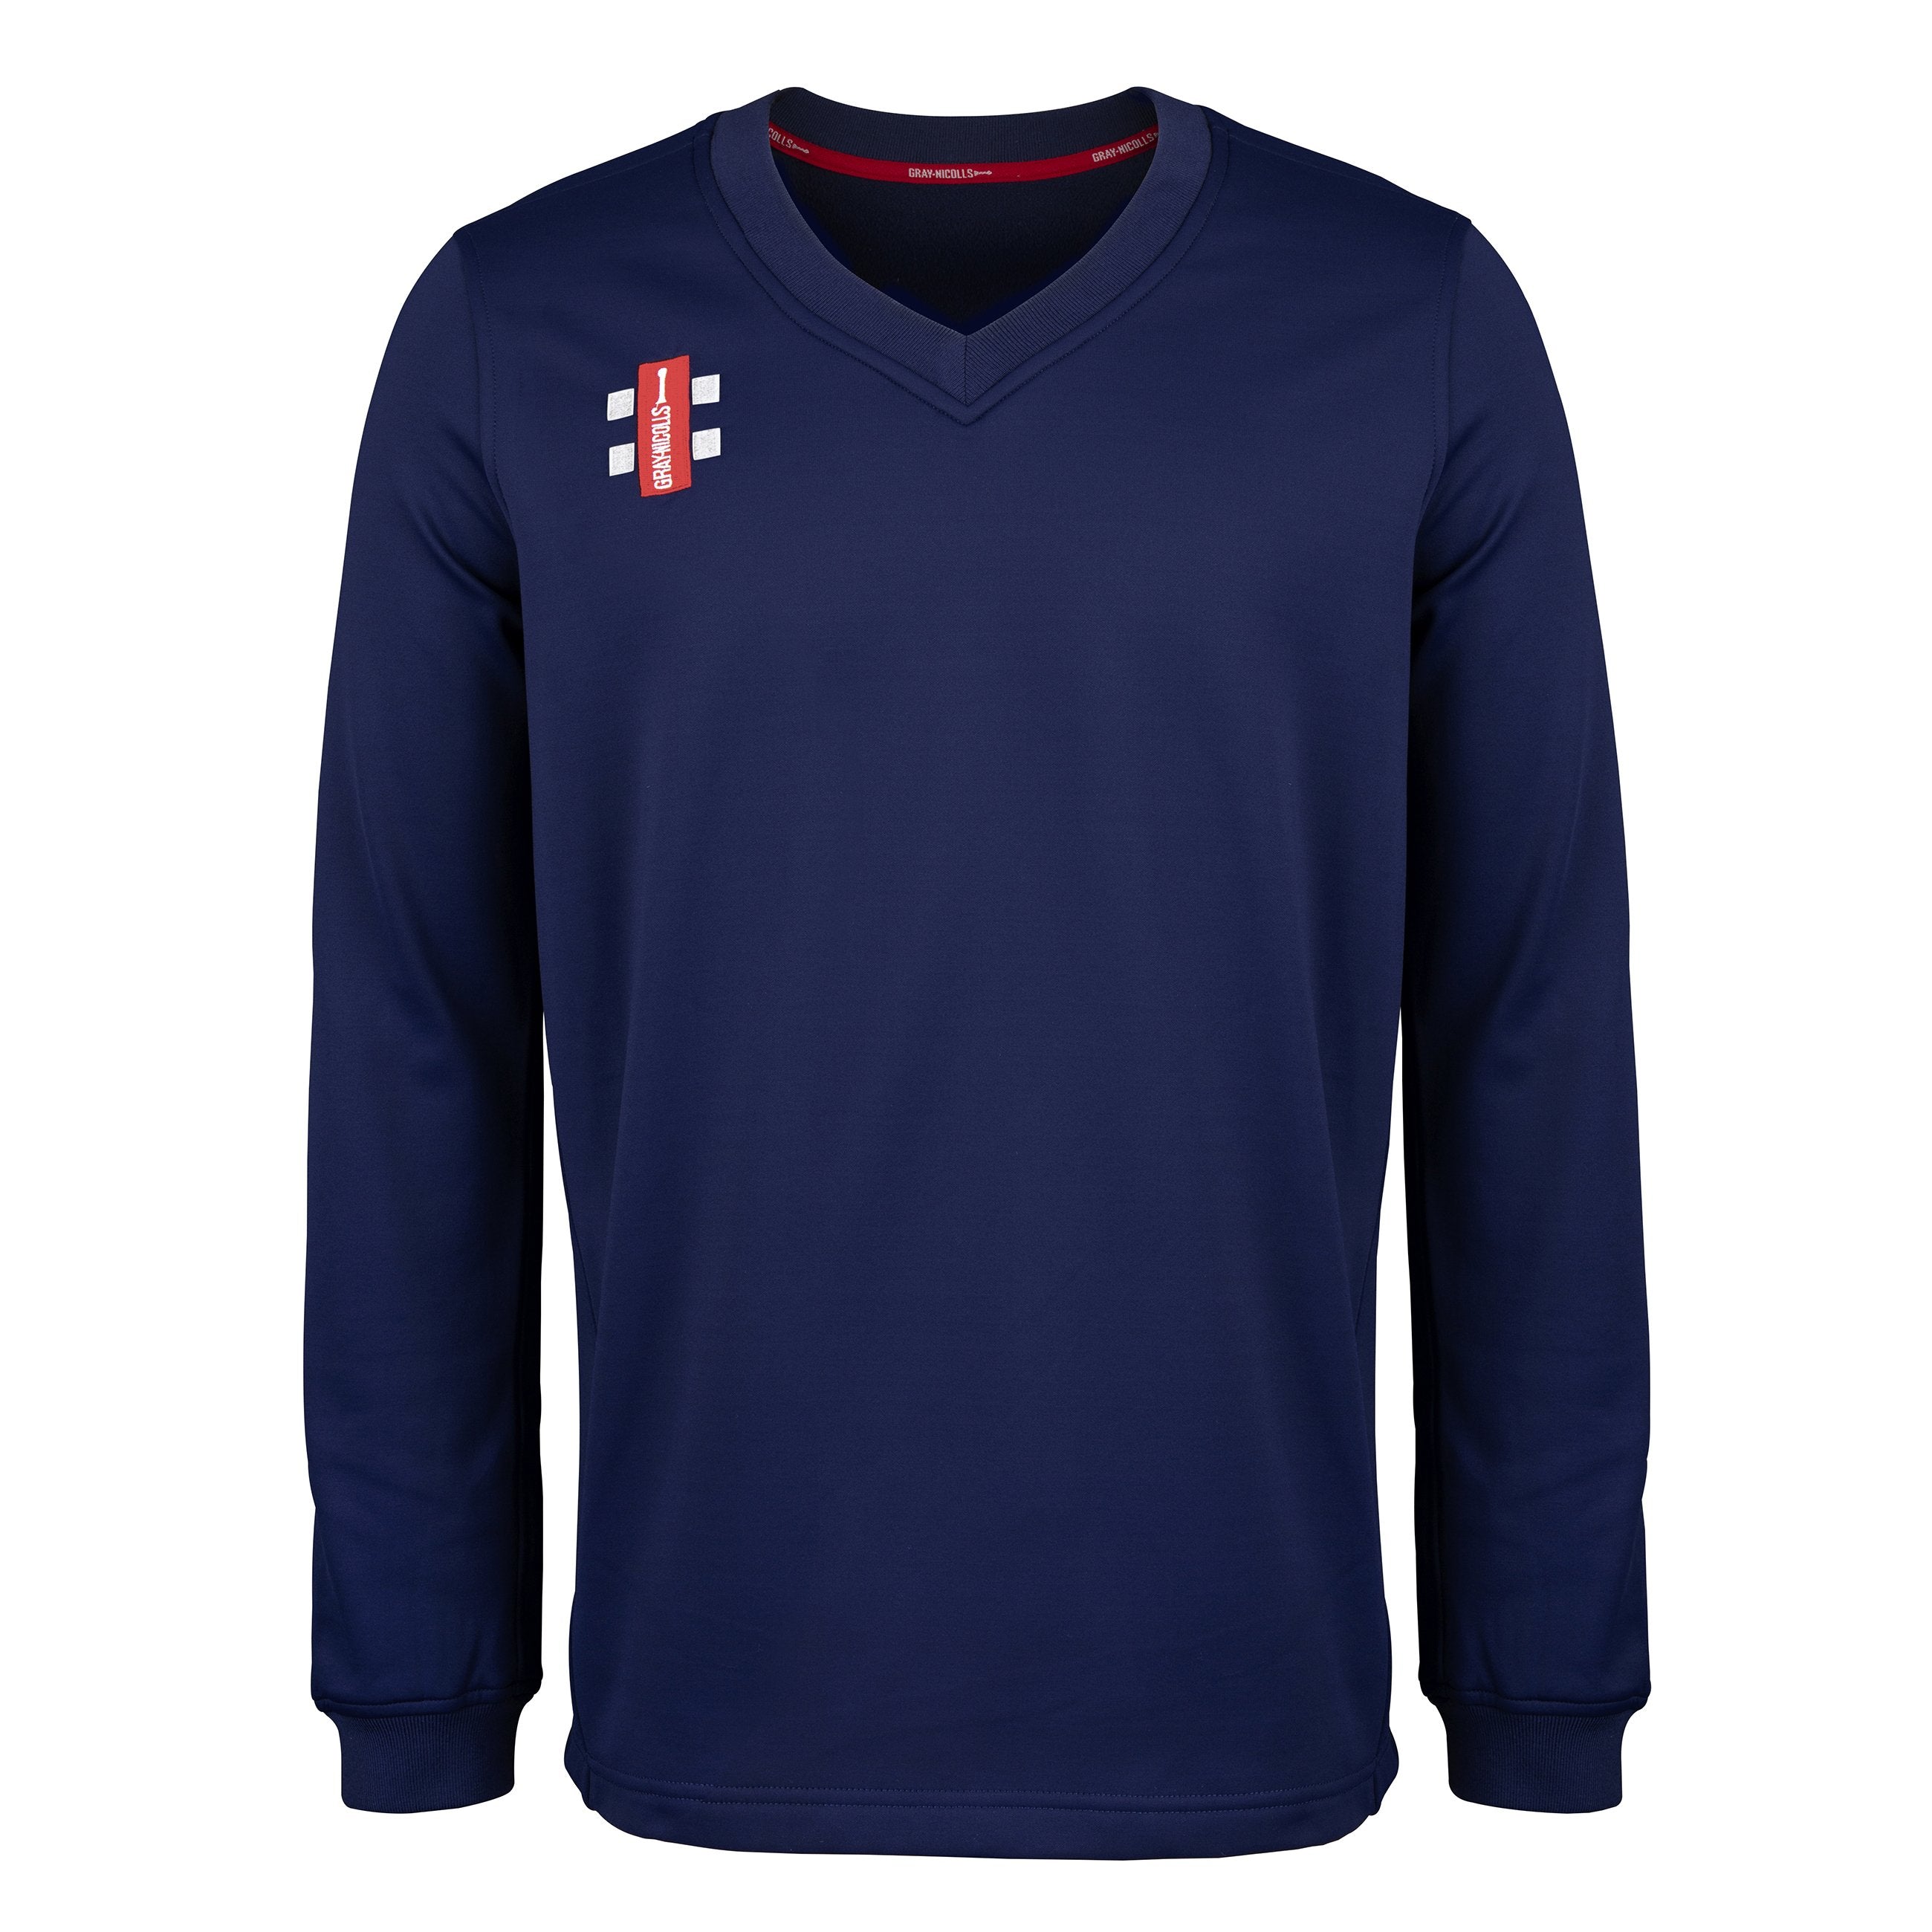 2600 CCCB20 5031405 Sweater Pro Performance Navy M Front